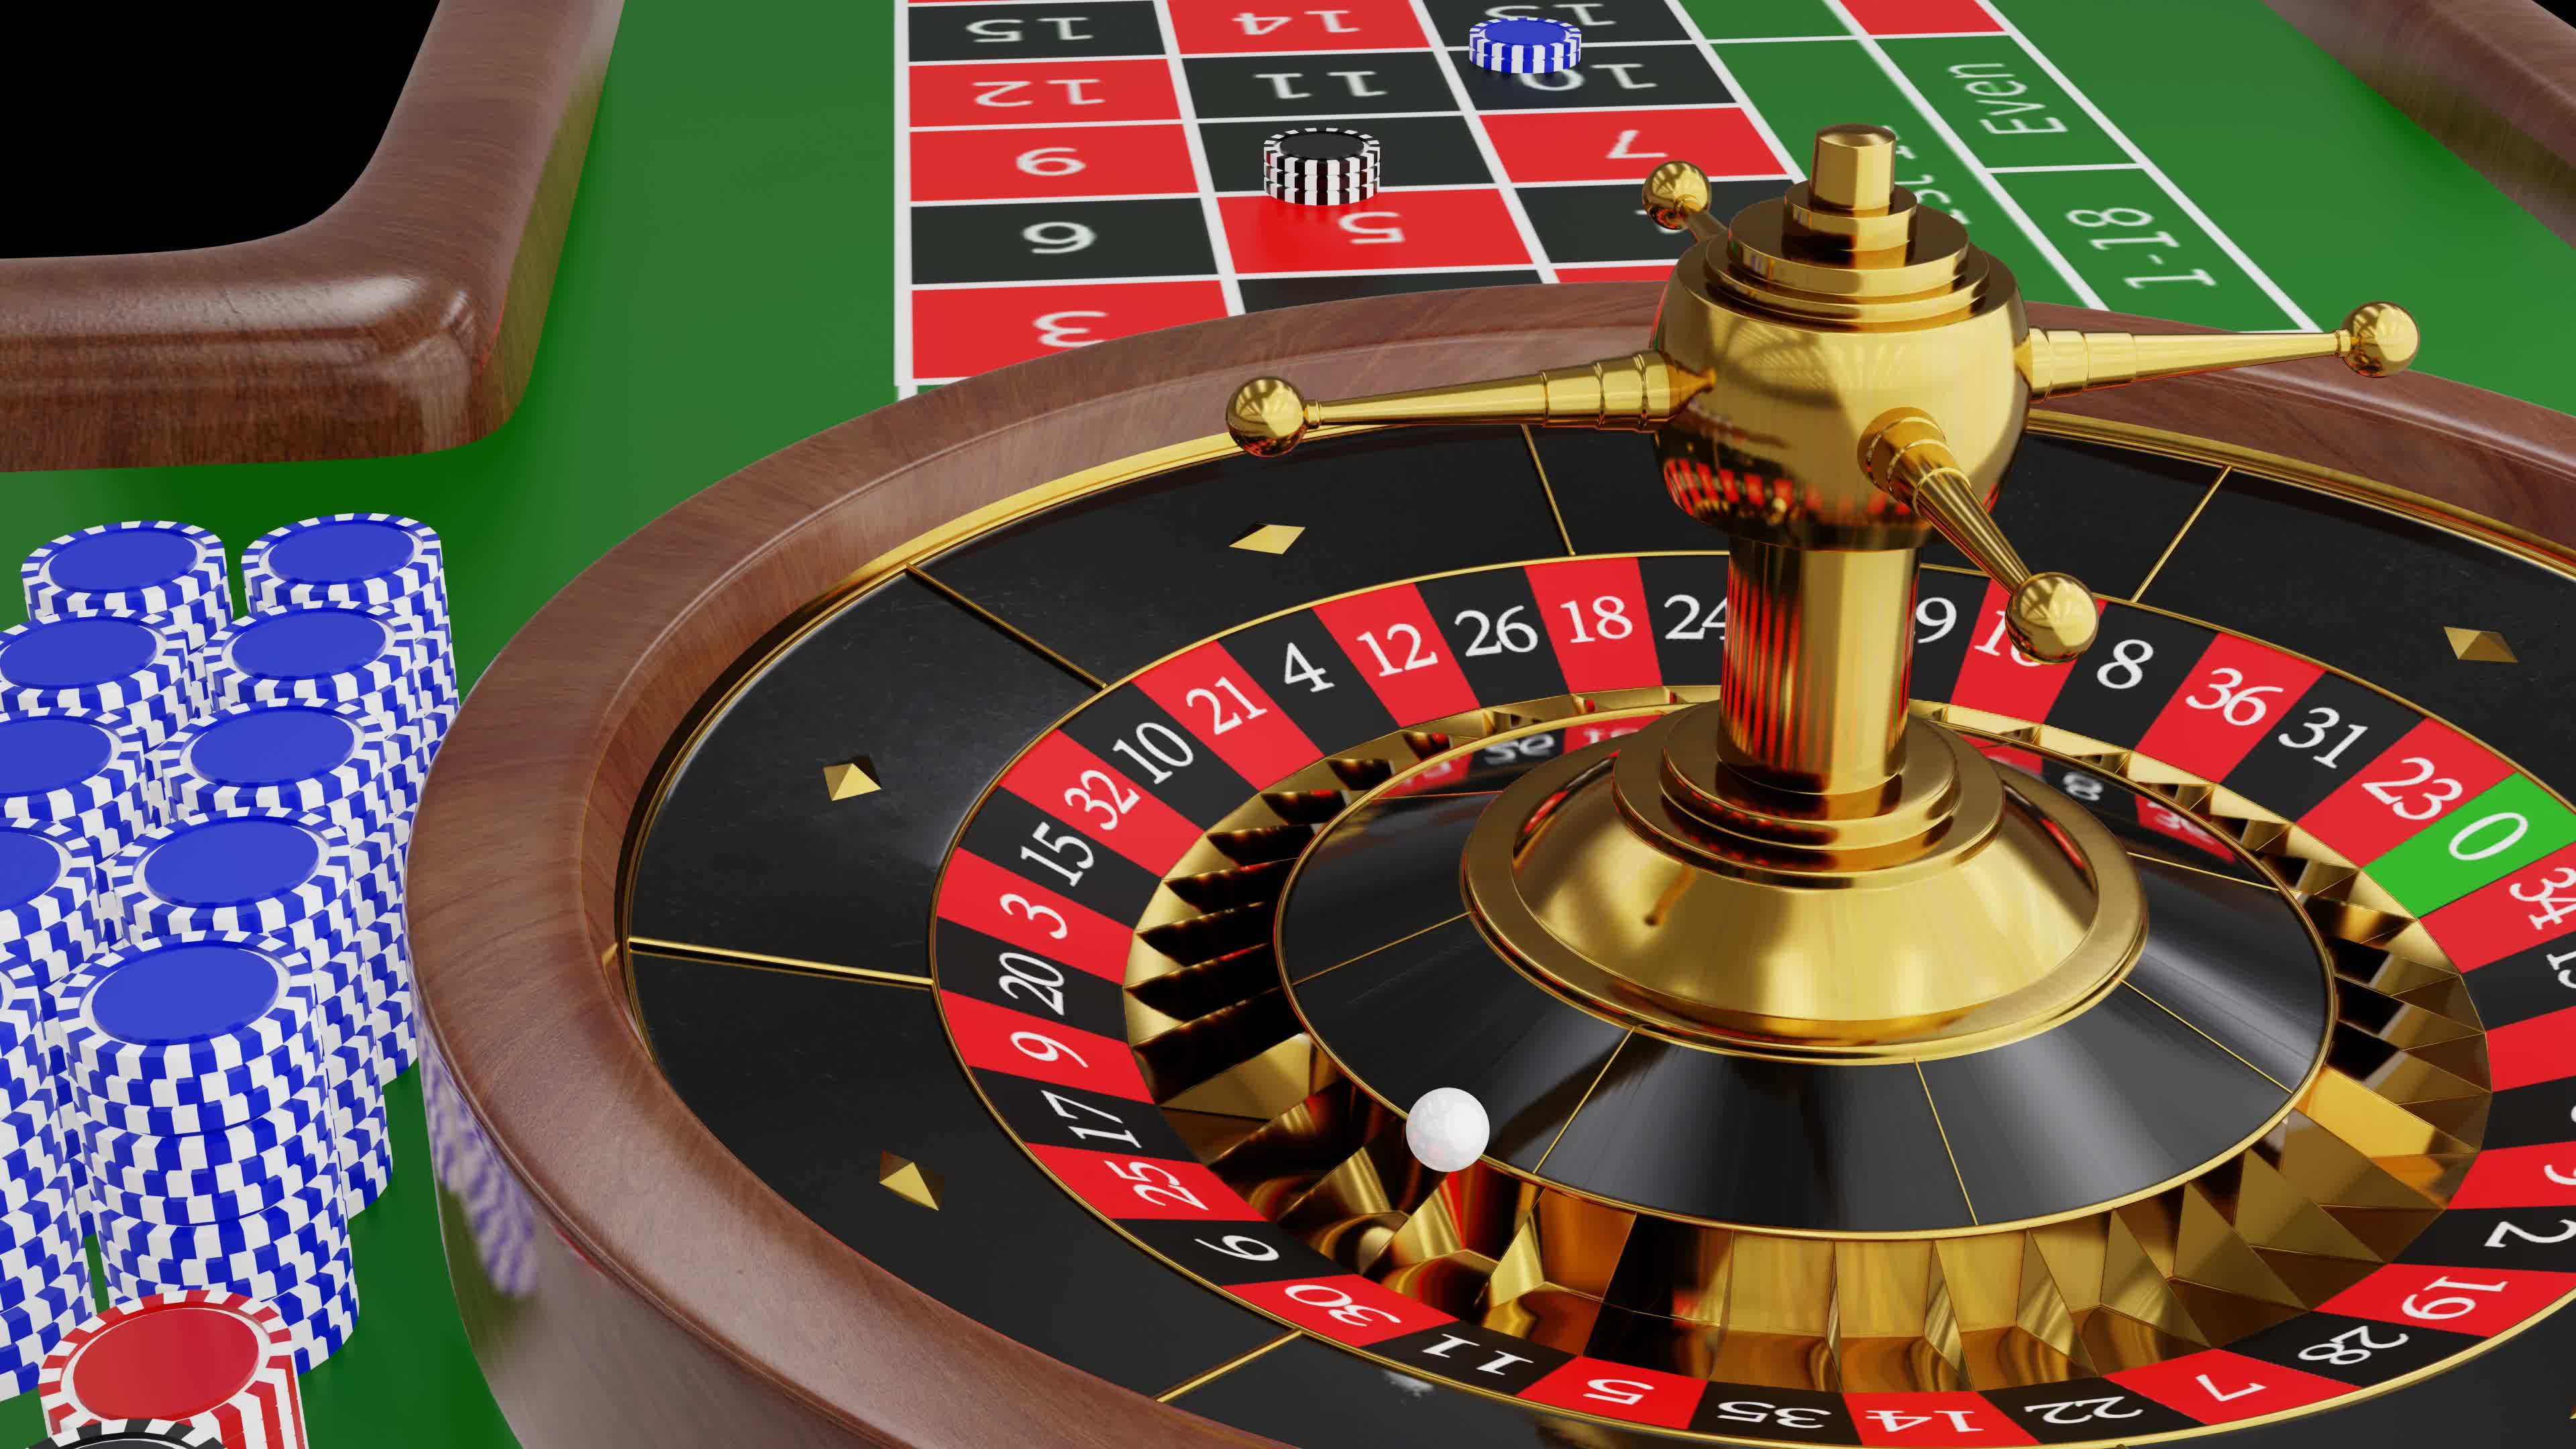 Free Casino Online Games – Games Played For Free Money